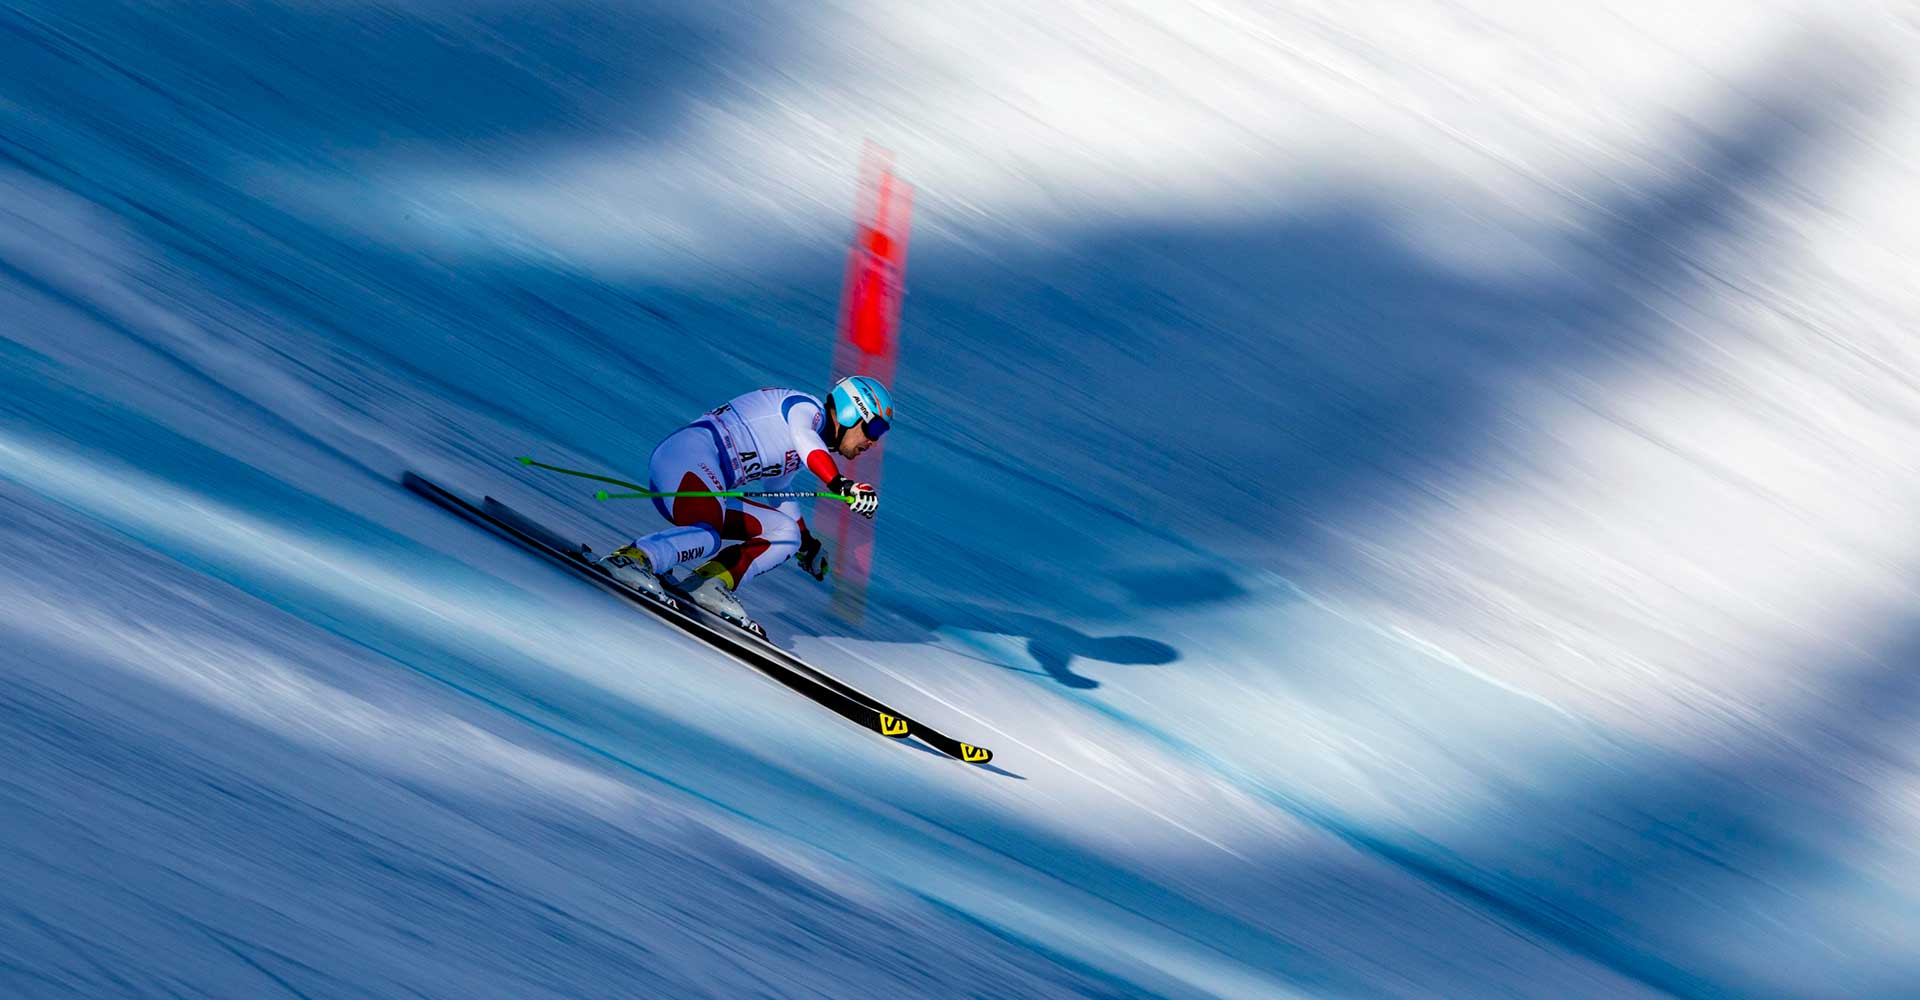 Downhill skier at the Audi FIS World Cup at Aspen Mountain.